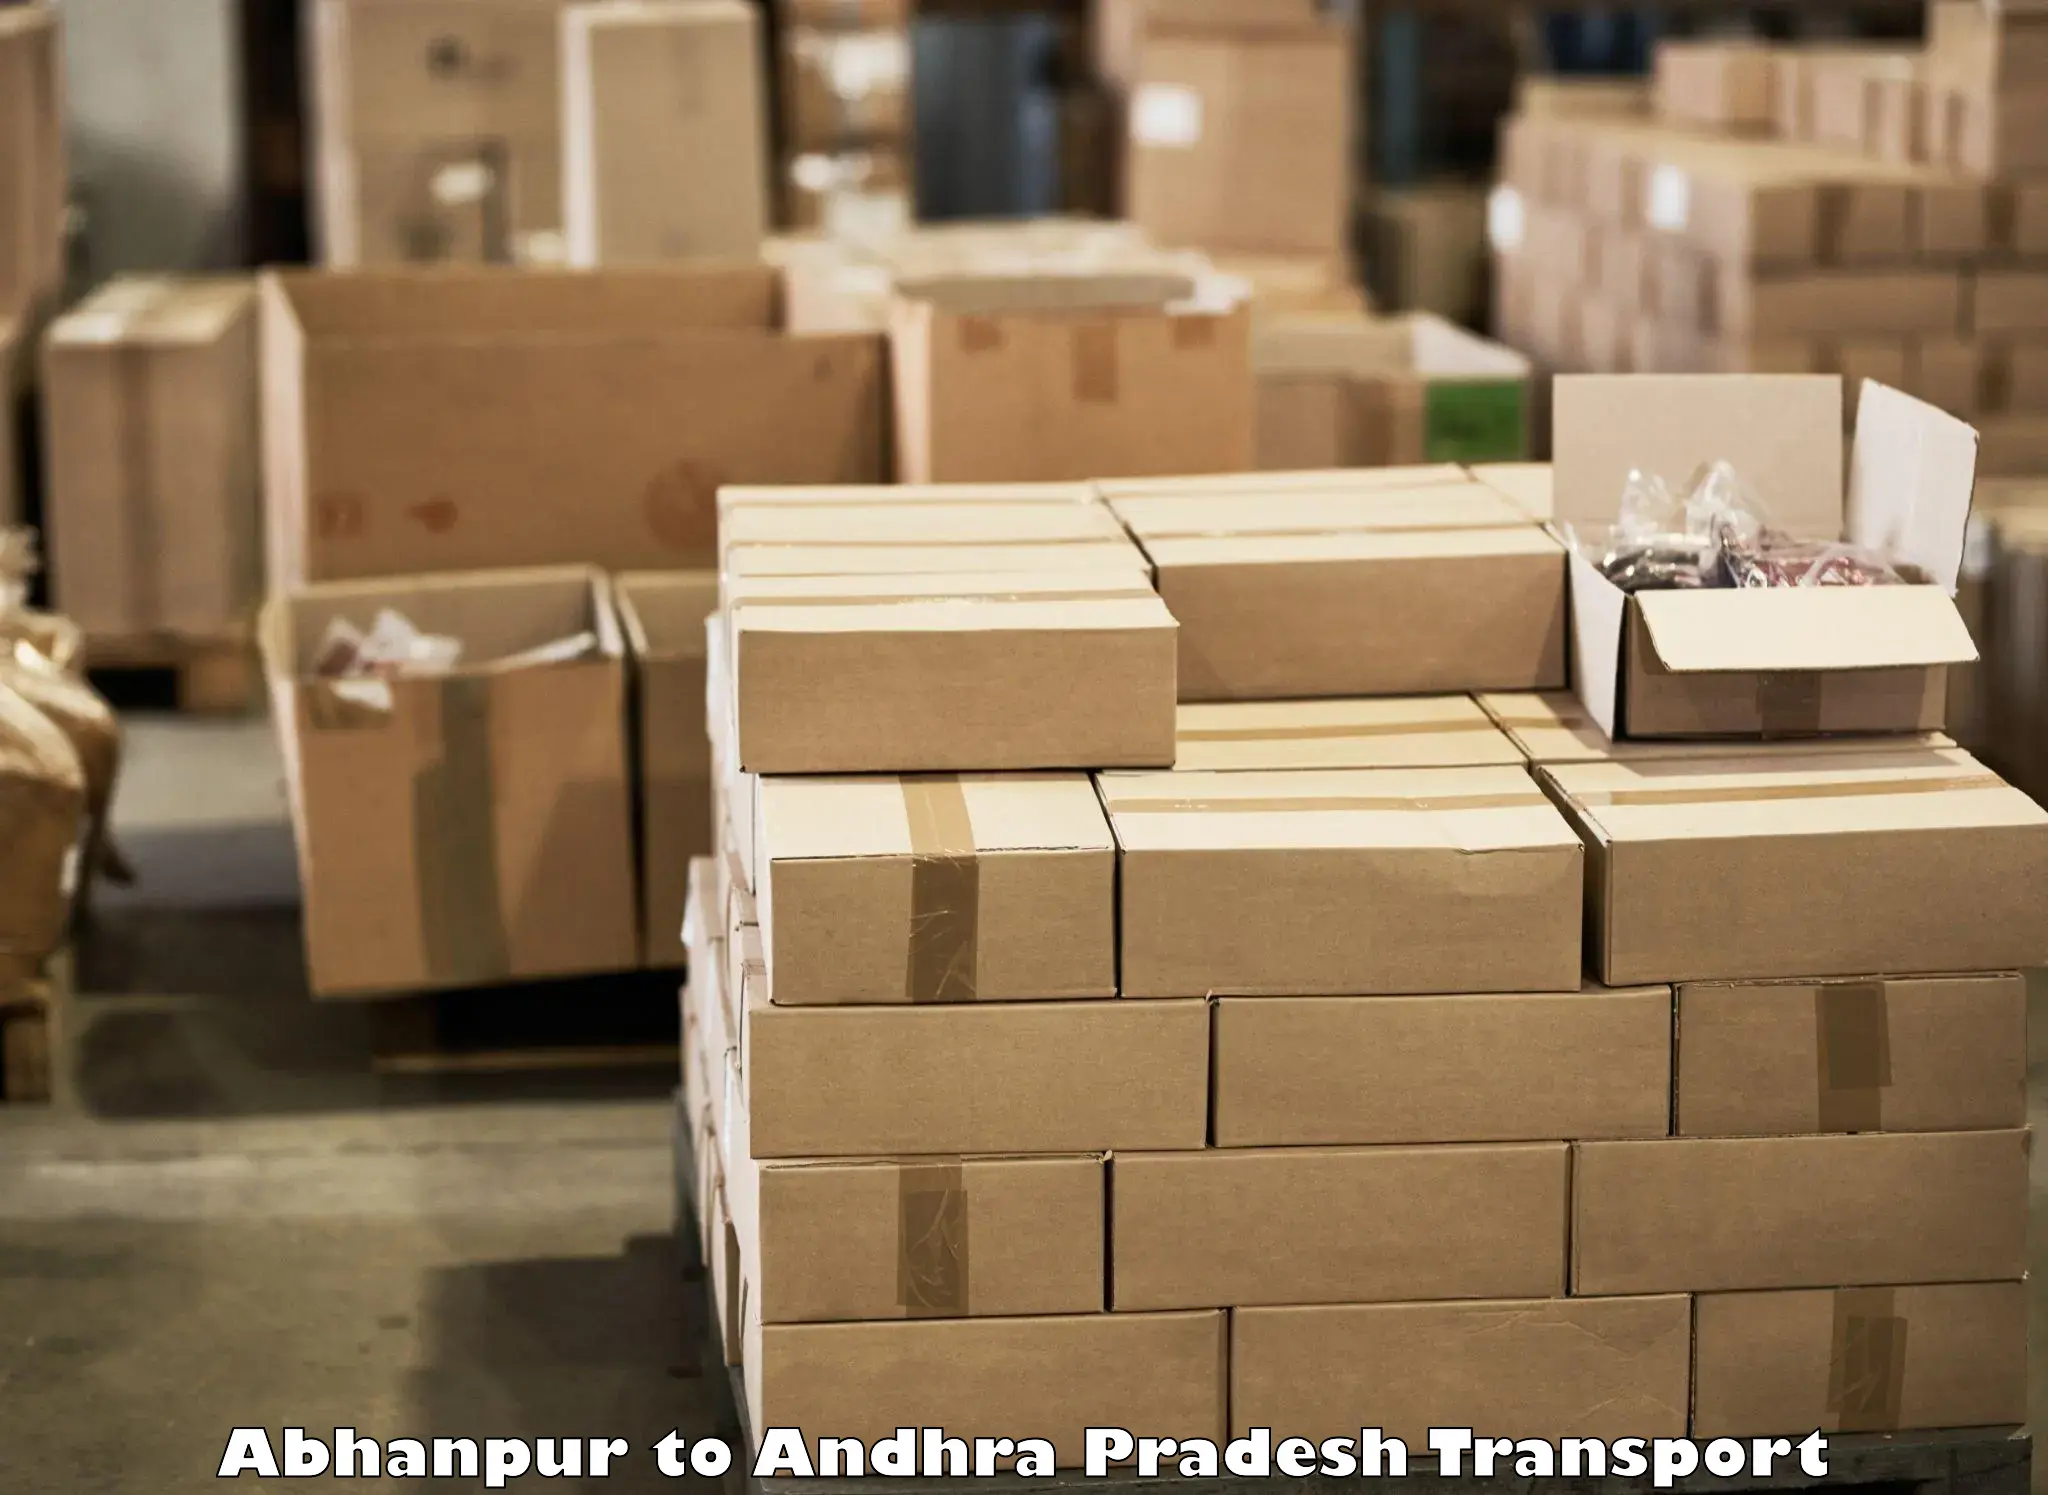 Truck transport companies in India Abhanpur to Bobbili